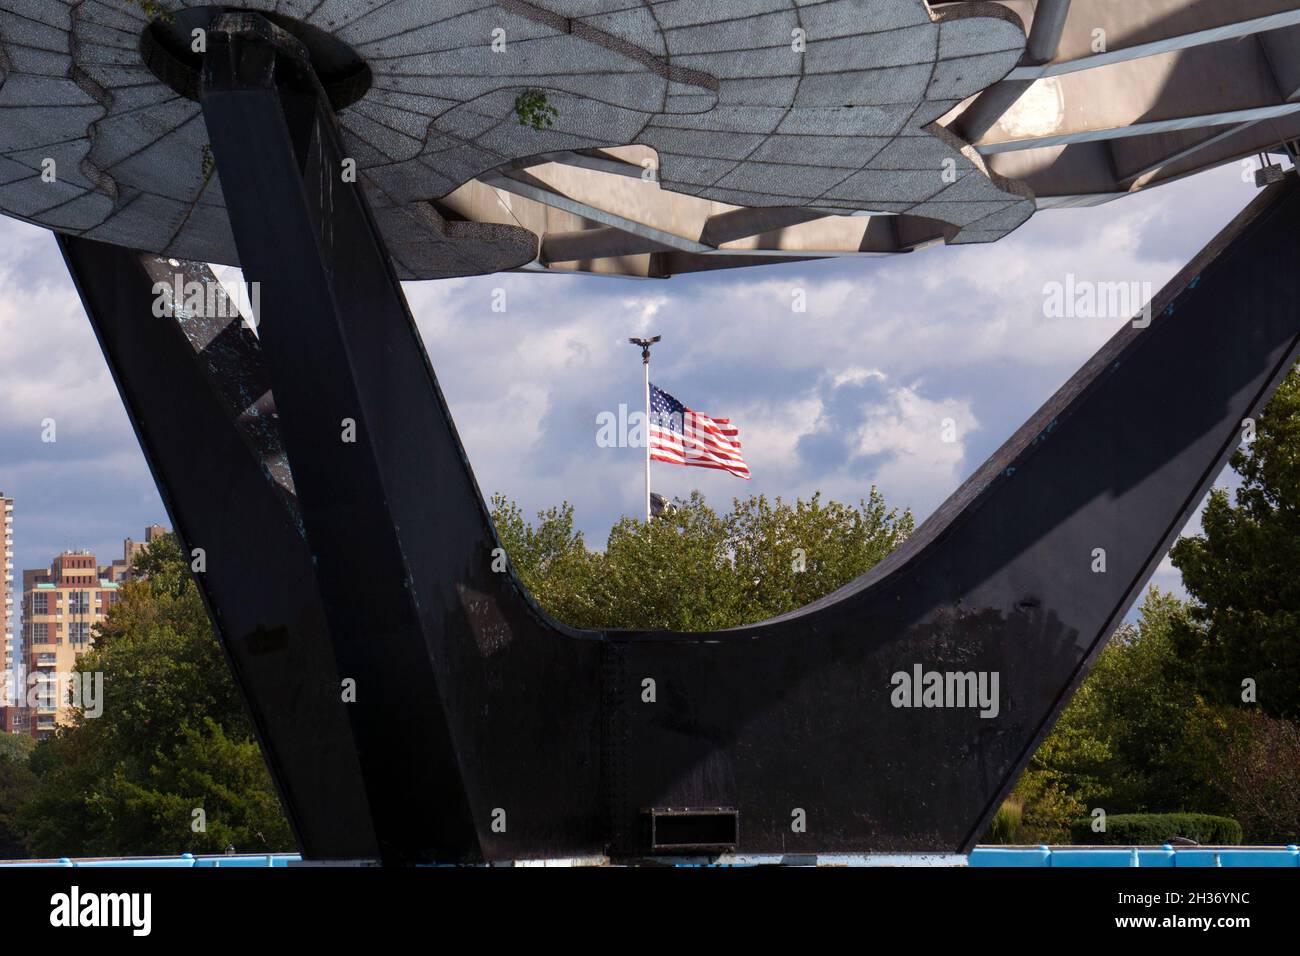 An American flag as seen through the Unisphere in Flushing Meadows Corona Park in Queens, New York City. Stock Photo